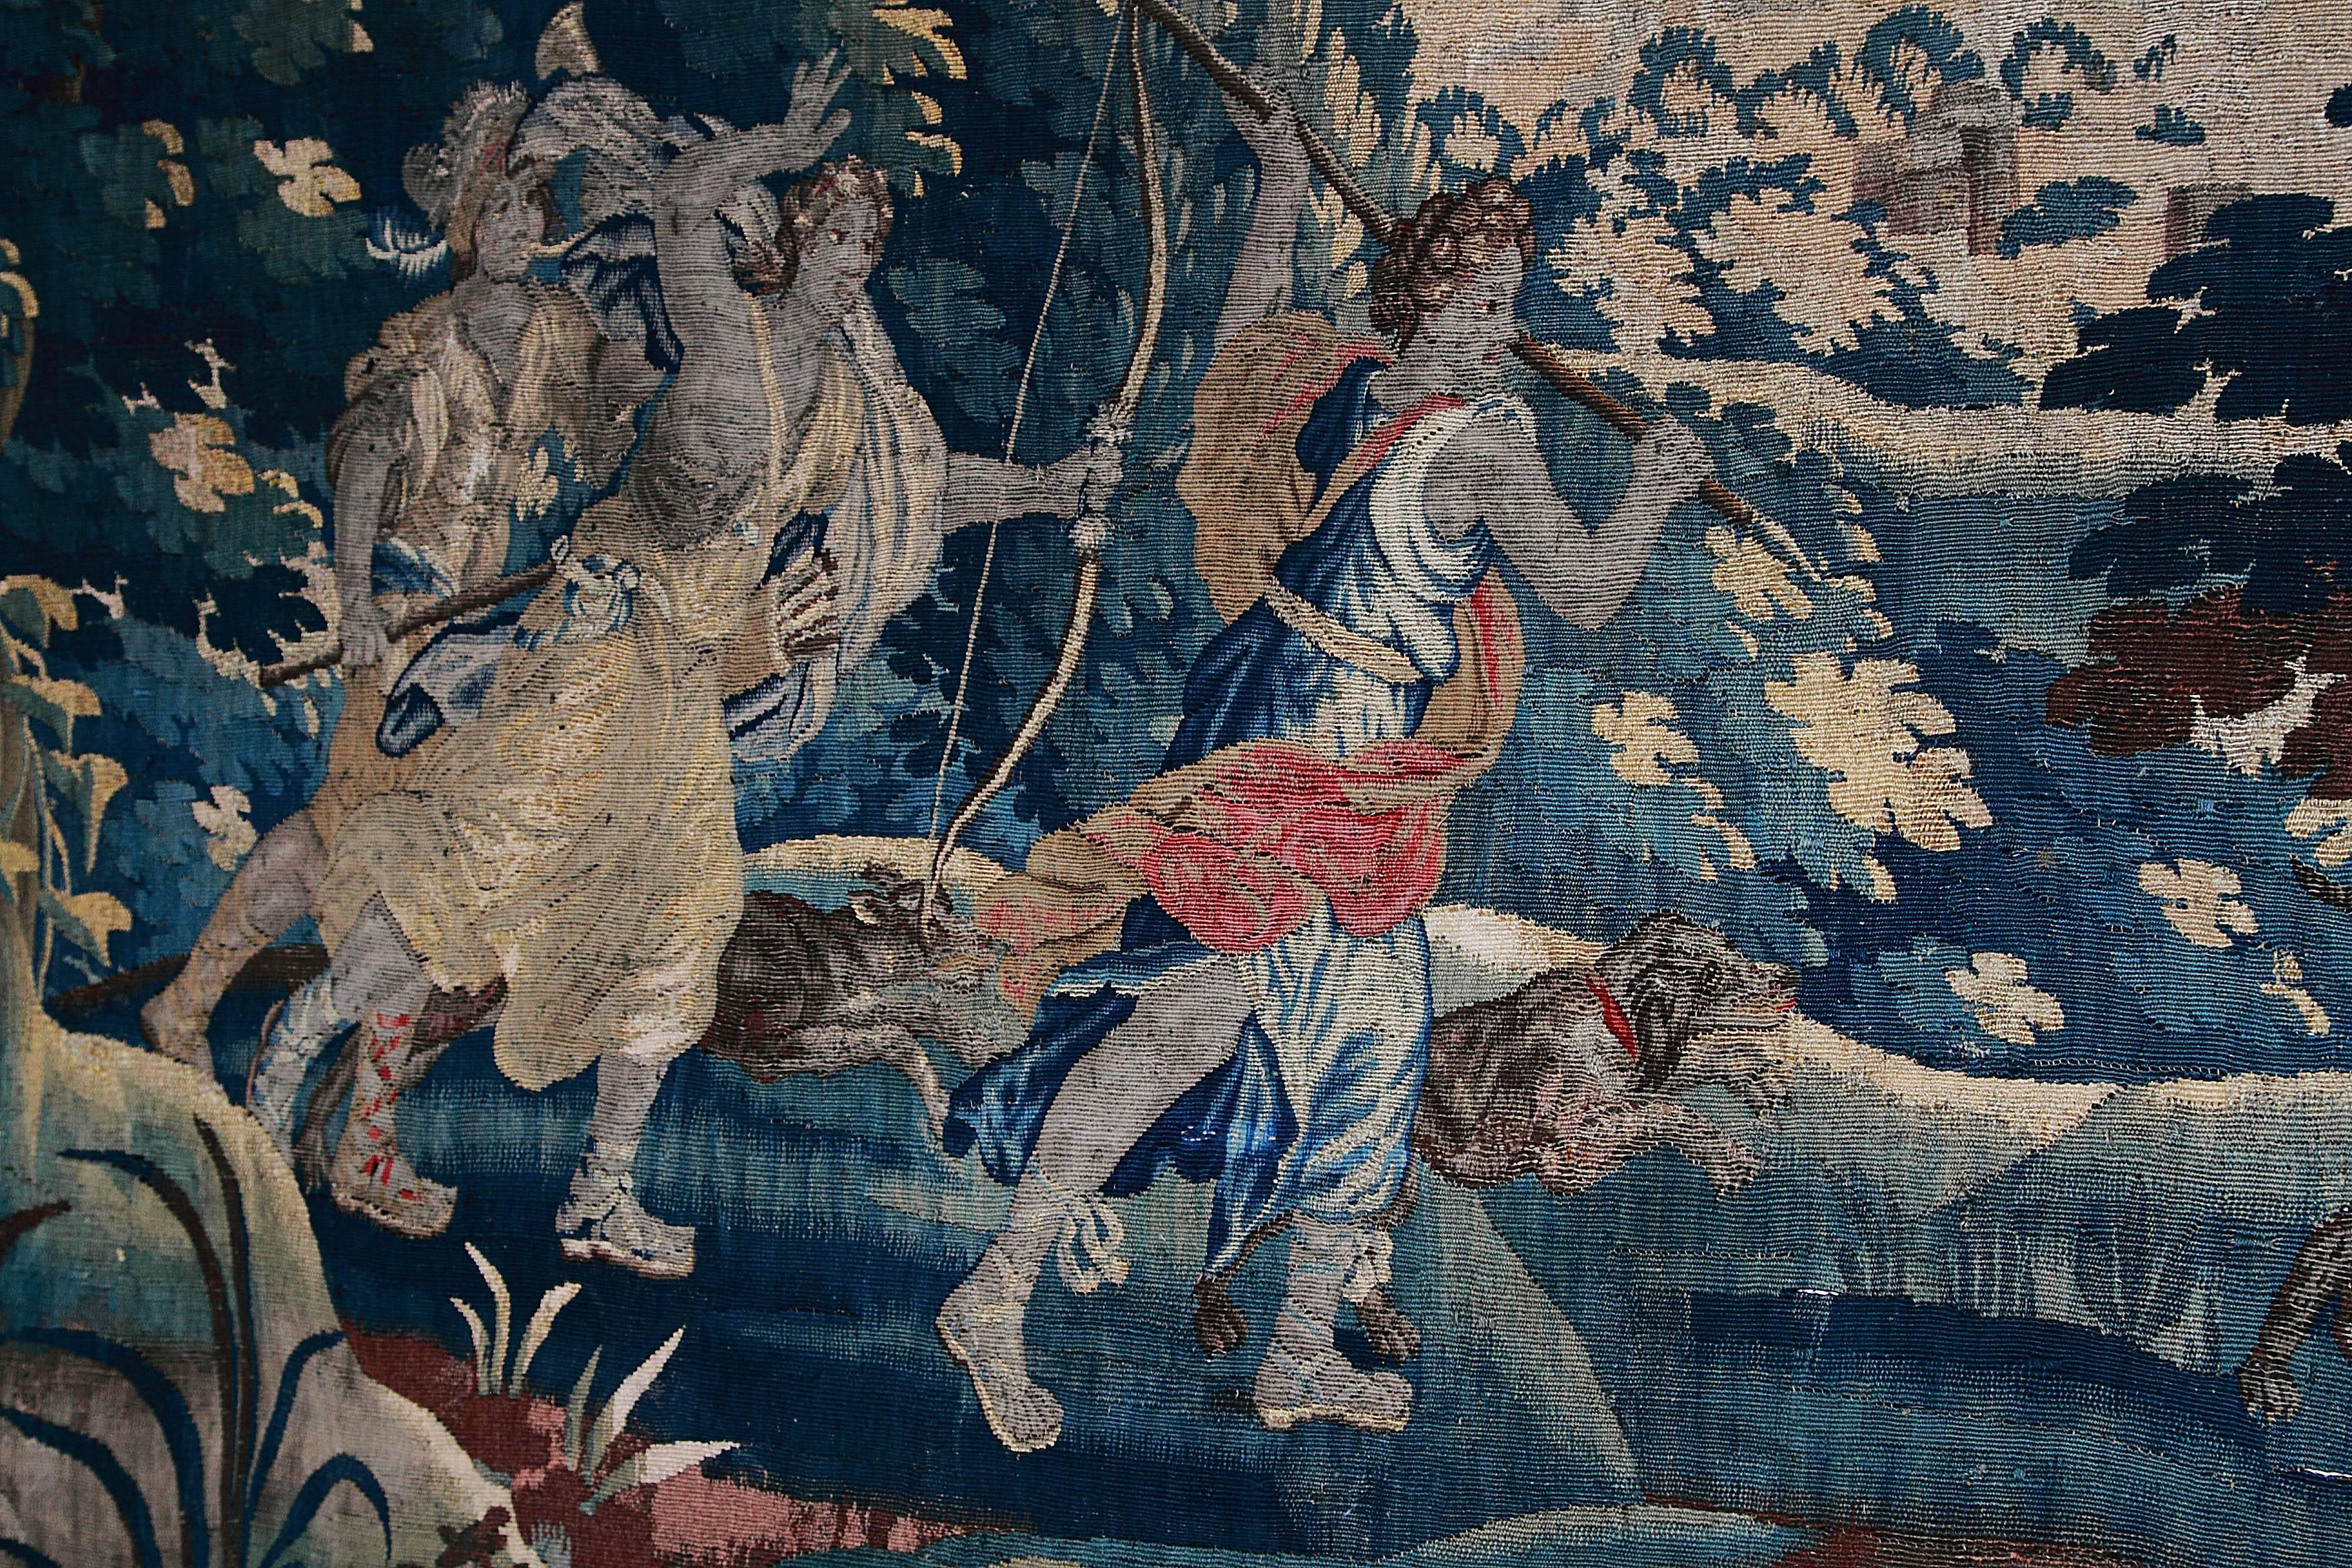 Woven 18th Century Aubusson Tapestry Featuring Diana, Goddess of the Hunt